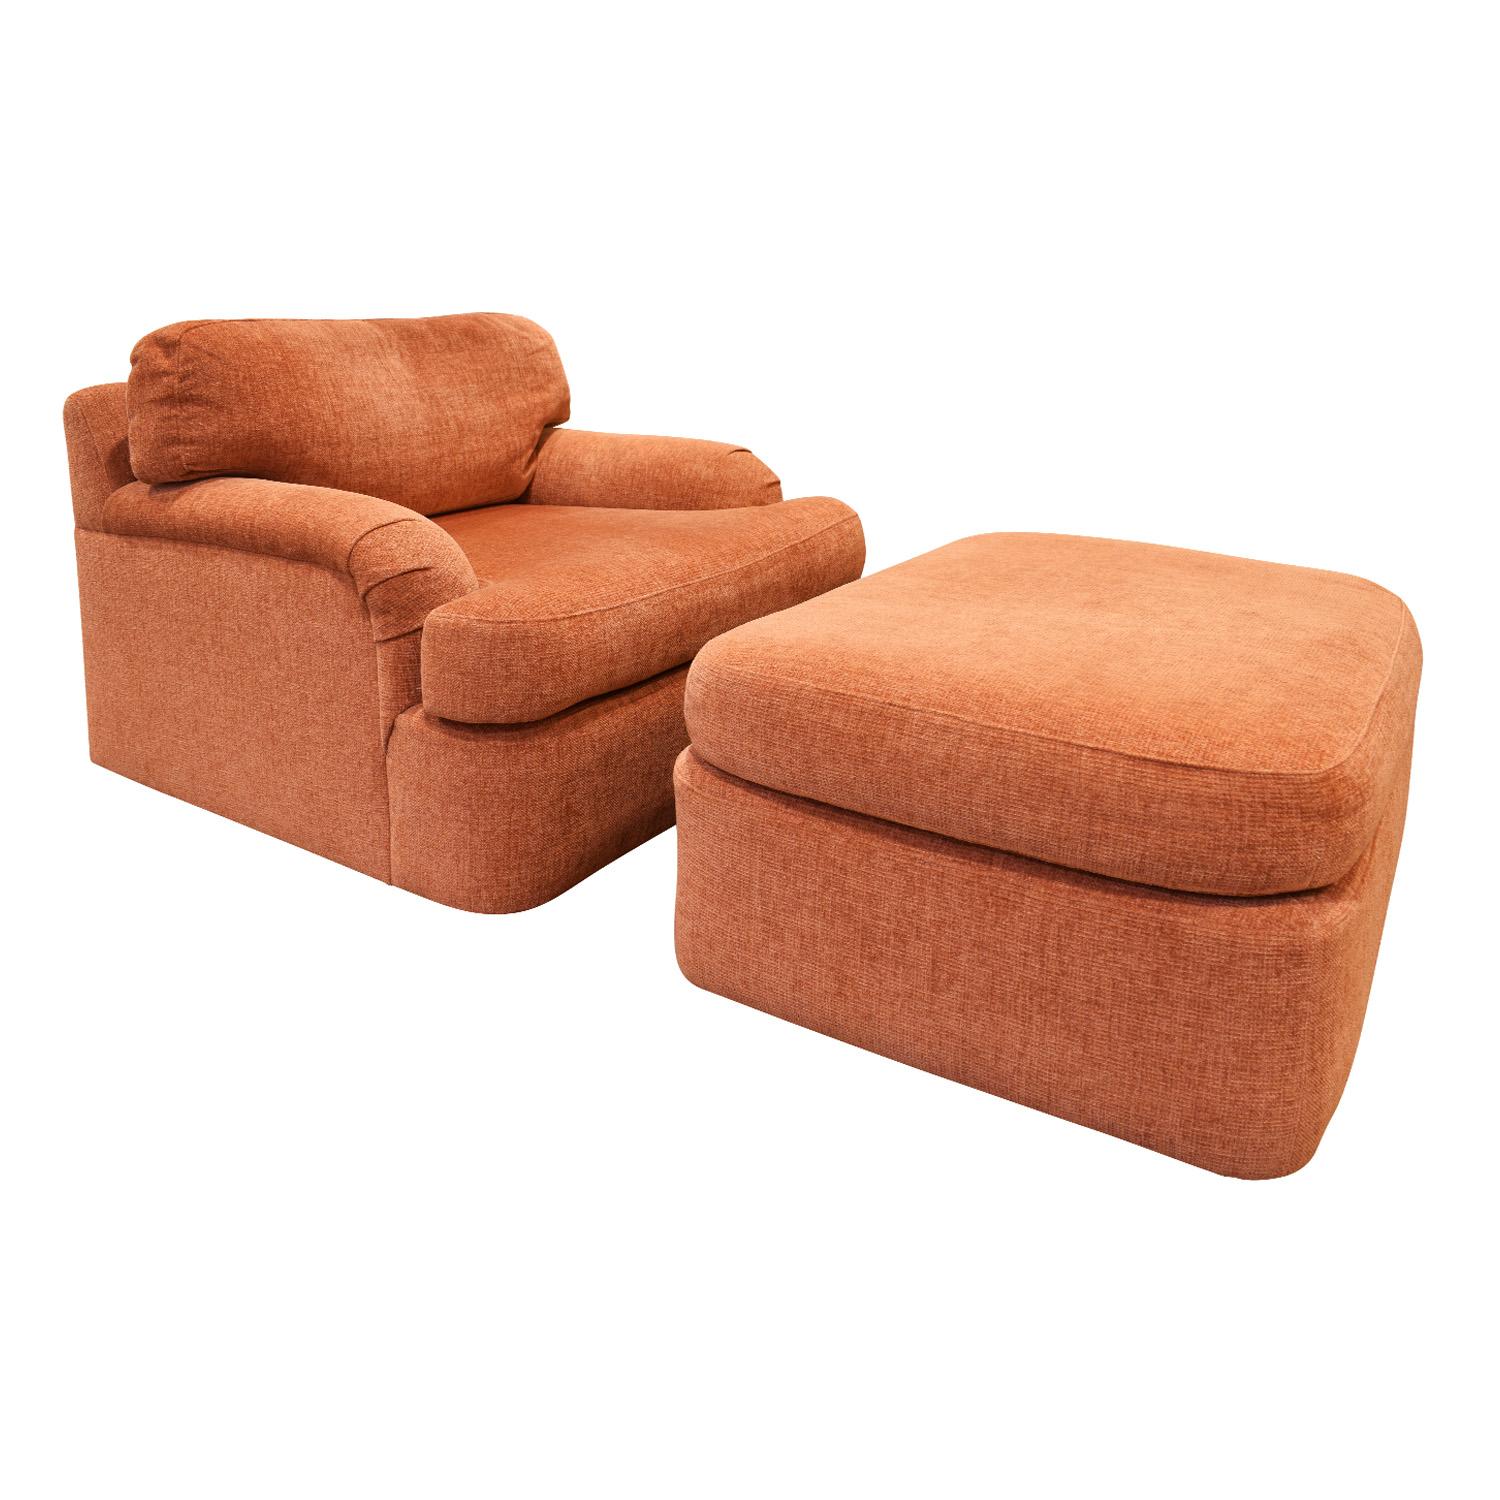 Pair of large swiveling lounge chairs with matching ottomans on castors, by Milo Baughman for Thayer Coggin, American, 1970s. The swiveling base is recessed so it’s not readily visible. These are very comfortable.

Ottomans dimensions:

W 33.5